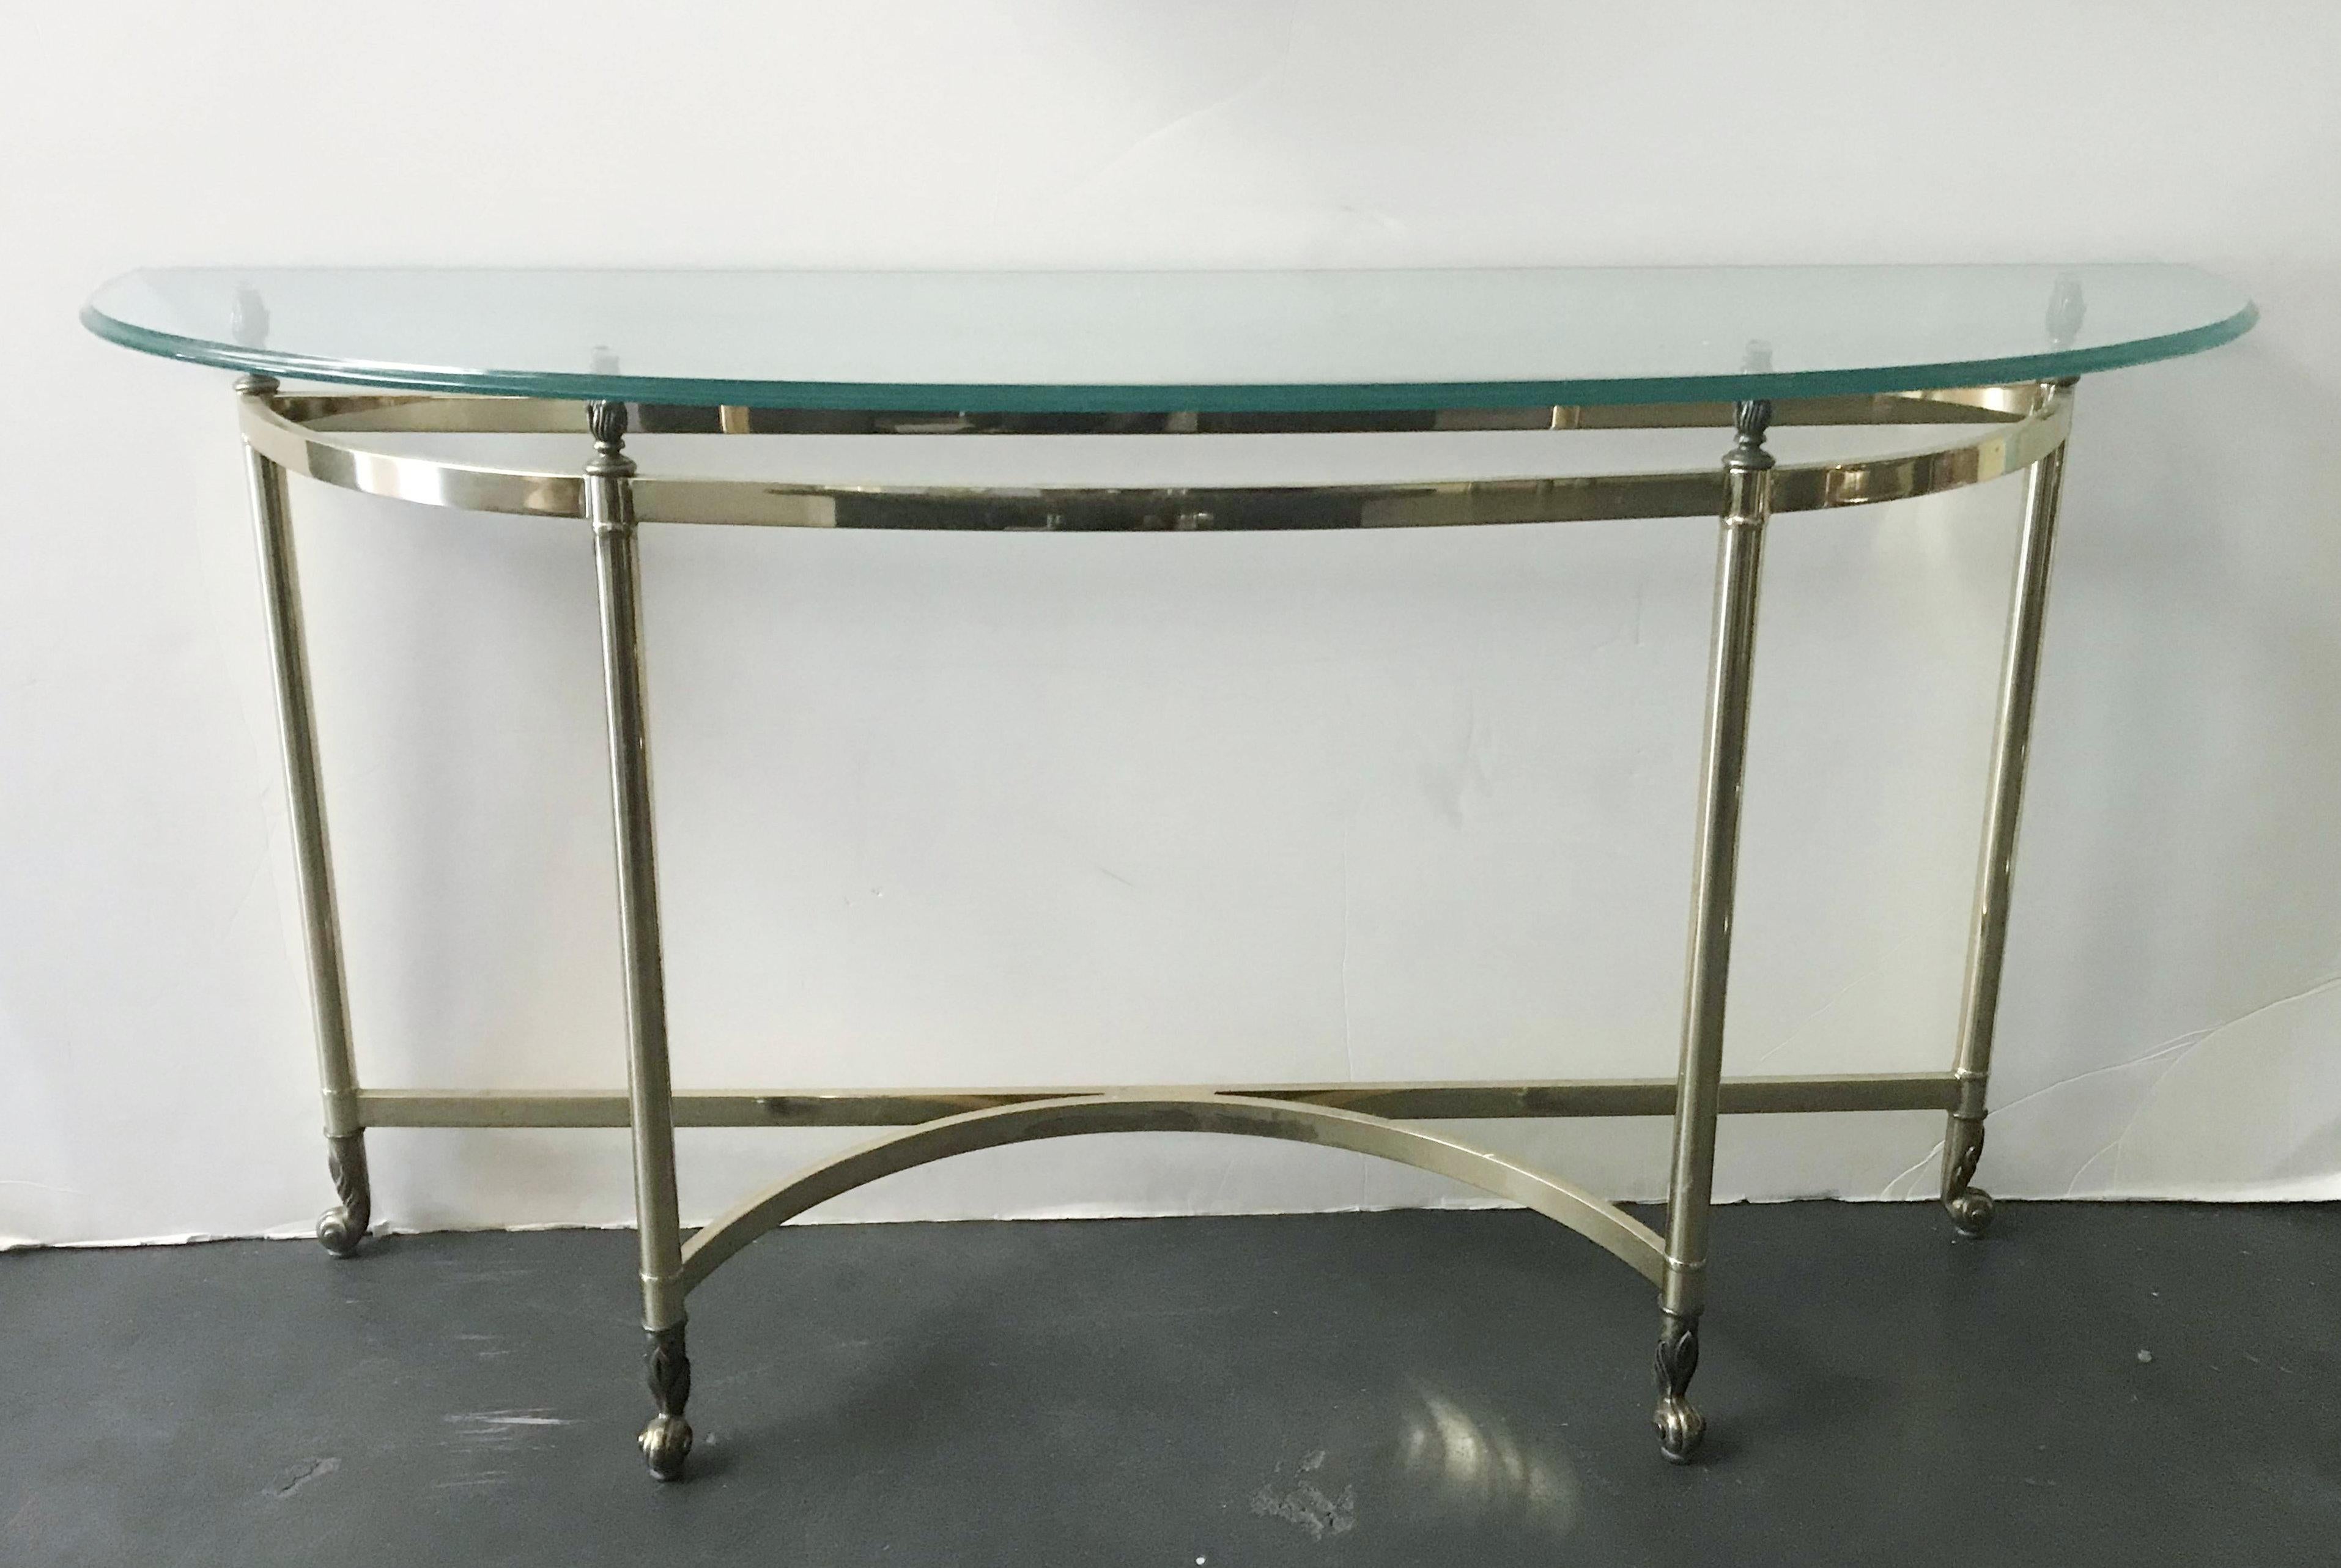 Vintage console table with thick beveled glass top and solid brass frame with ornate details / Made in USA, circa 1970s
Measures: Width 54 inches, depth 16 inches, height 28 inches.
1 available in stock in Palm Springs ON FINAL CLEARANCE SALE for